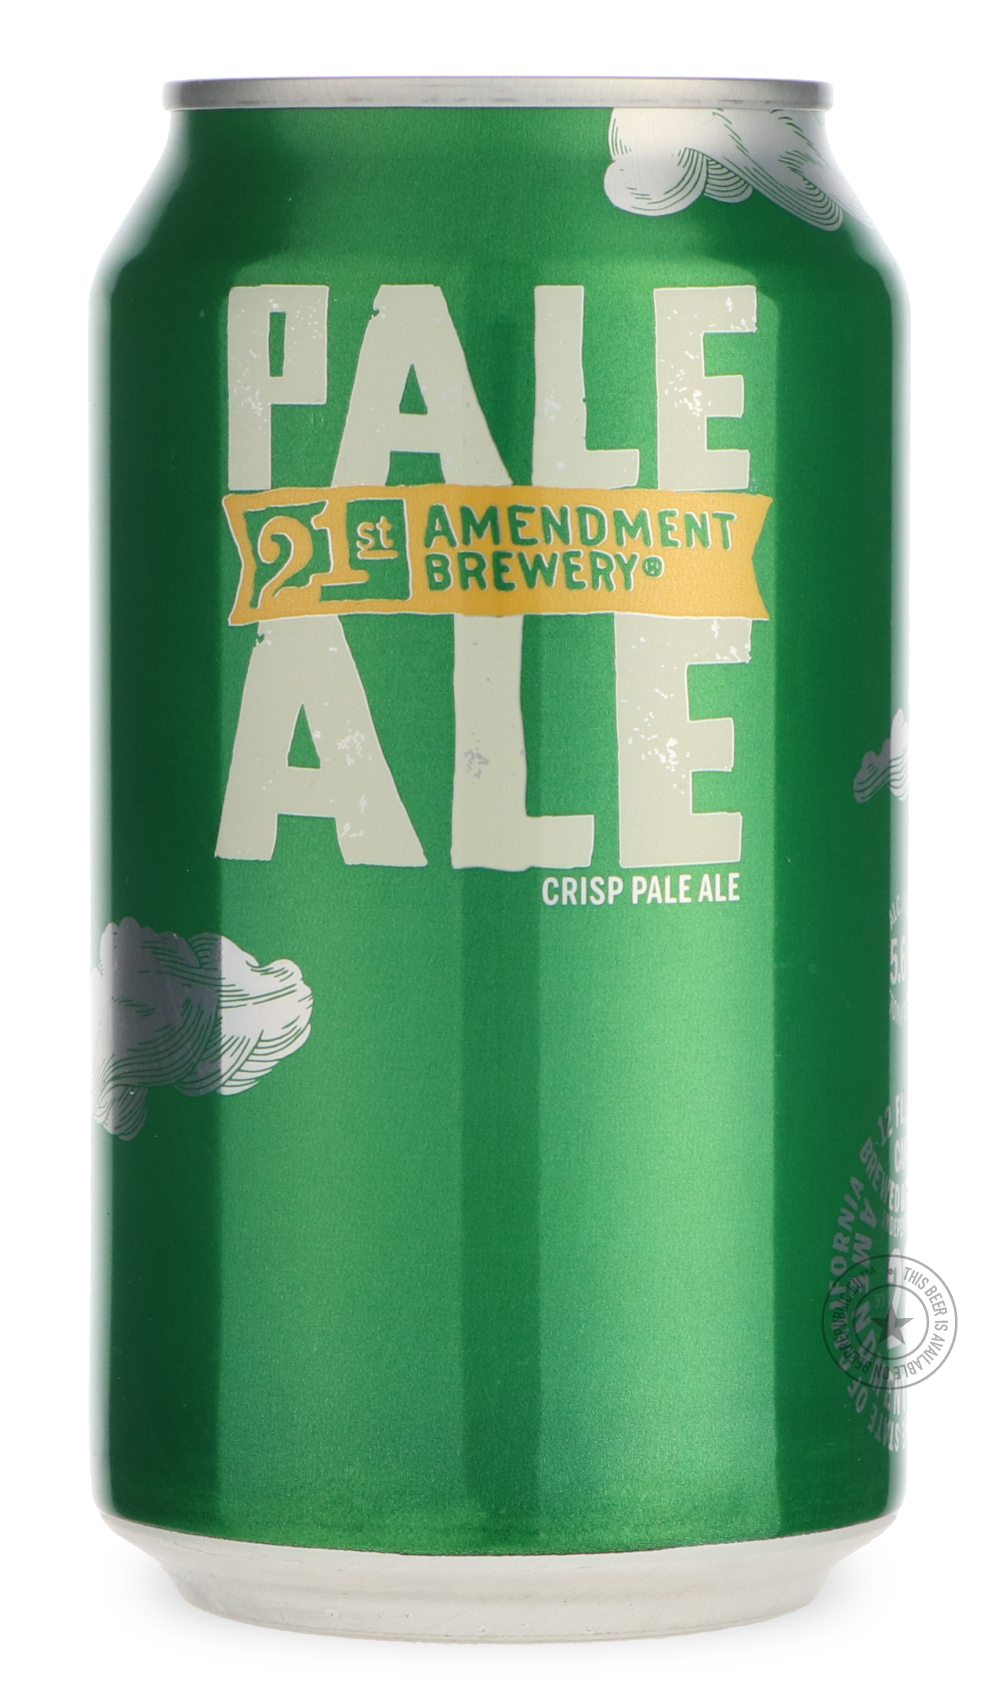 -21st Amendment- Pale Ale-IPA- Only @ Beer Republic - The best online beer store for American & Canadian craft beer - Buy beer online from the USA and Canada - Bier online kopen - Amerikaans bier kopen - Craft beer store - Craft beer kopen - Amerikanisch bier kaufen - Bier online kaufen - Acheter biere online - IPA - Stout - Porter - New England IPA - Hazy IPA - Imperial Stout - Barrel Aged - Barrel Aged Imperial Stout - Brown - Dark beer - Blond - Blonde - Pilsner - Lager - Wheat - Weizen - Amber - Barley 